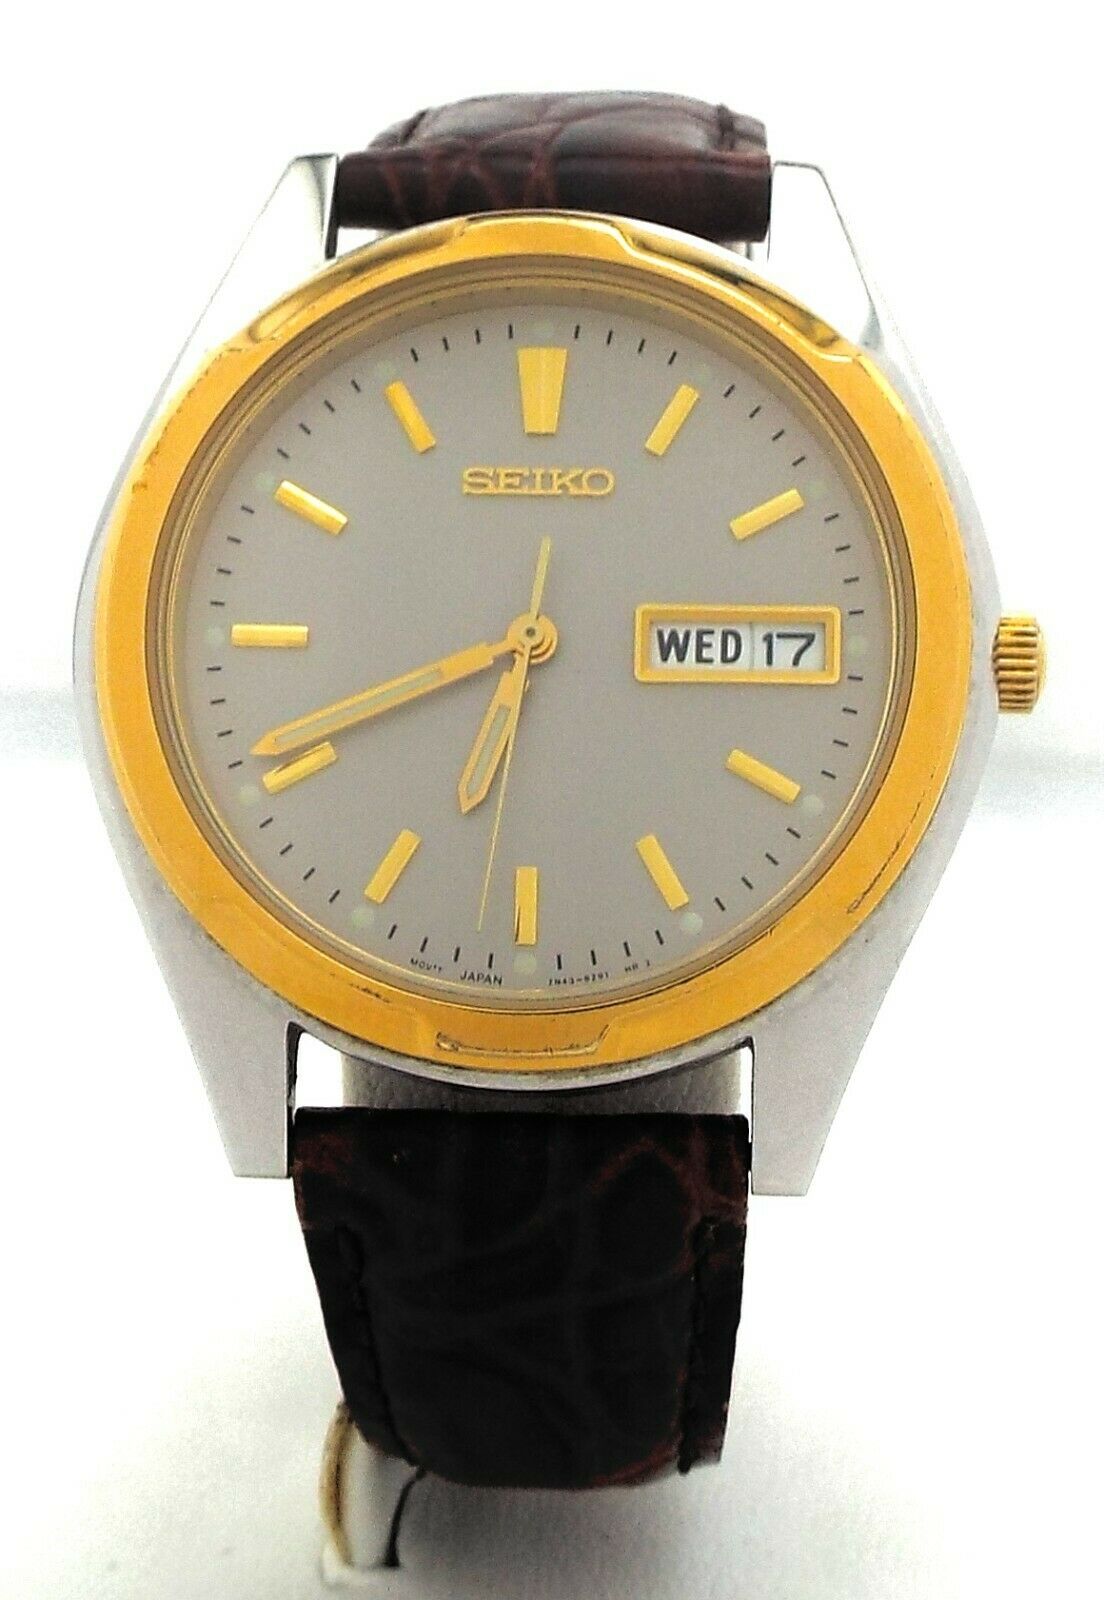 Seiko - 7n43-8199 - Two-Tone Watch - Quartz - New Battery - Leather Band  ~#3121 | WatchCharts